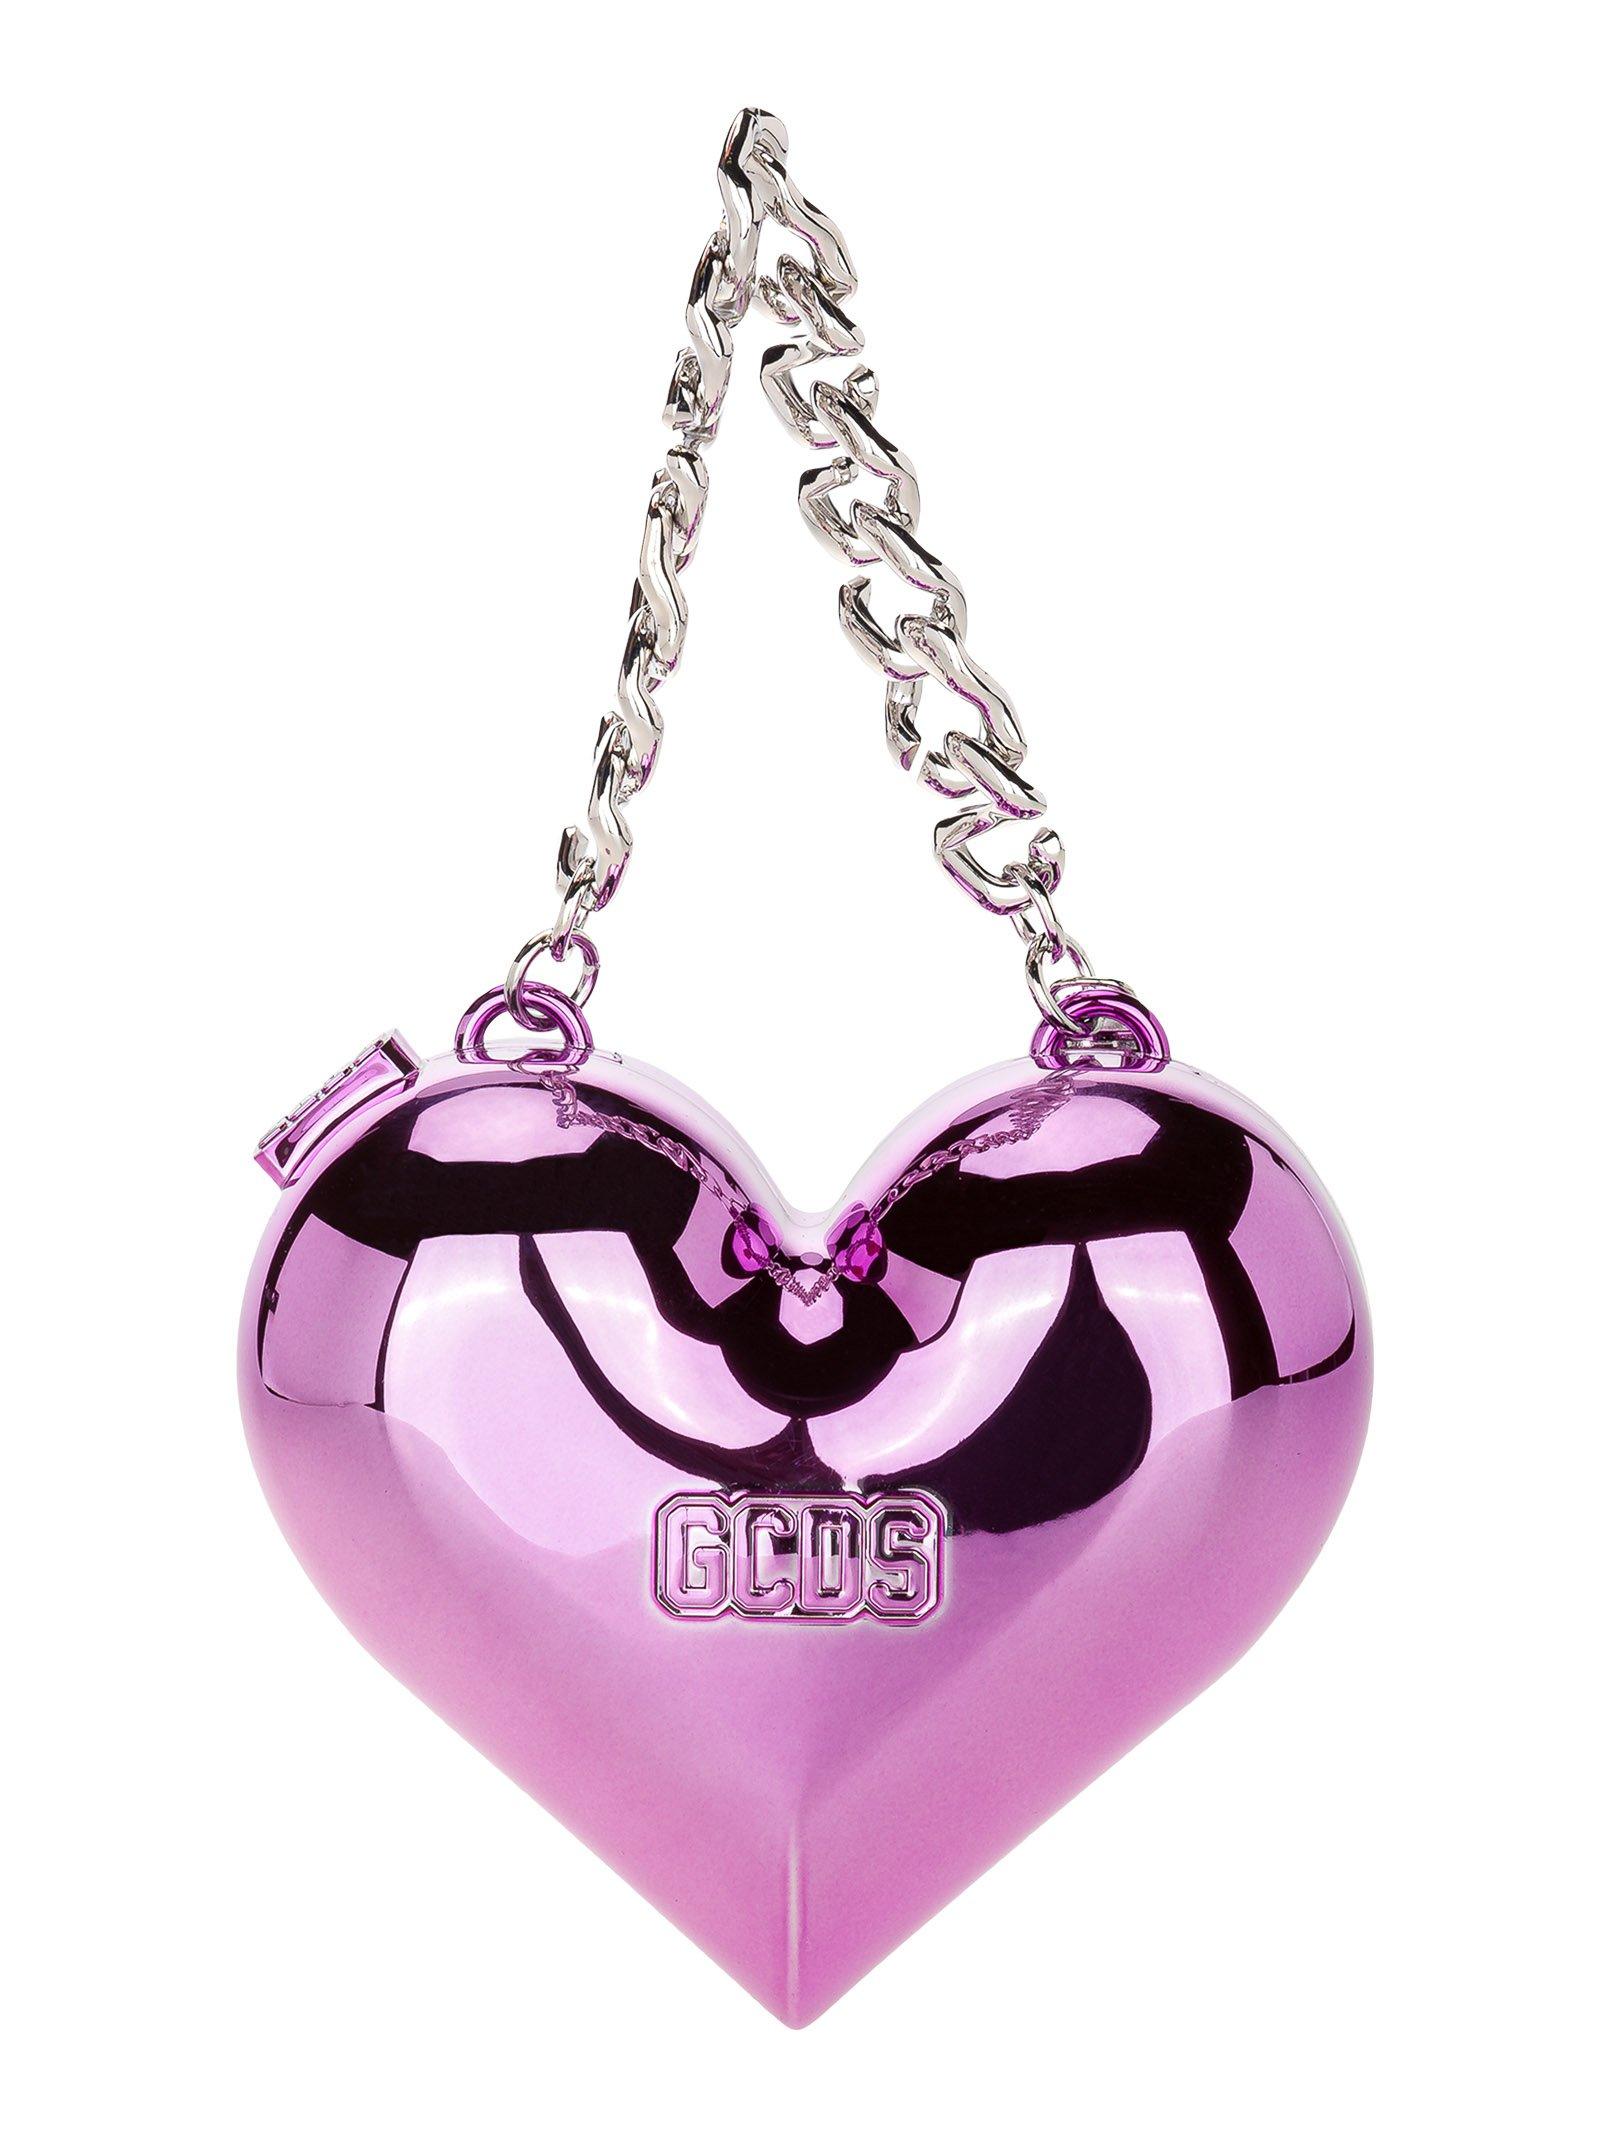 Gcds Heart-shaped Chain Strapped Tote Bag in Pink